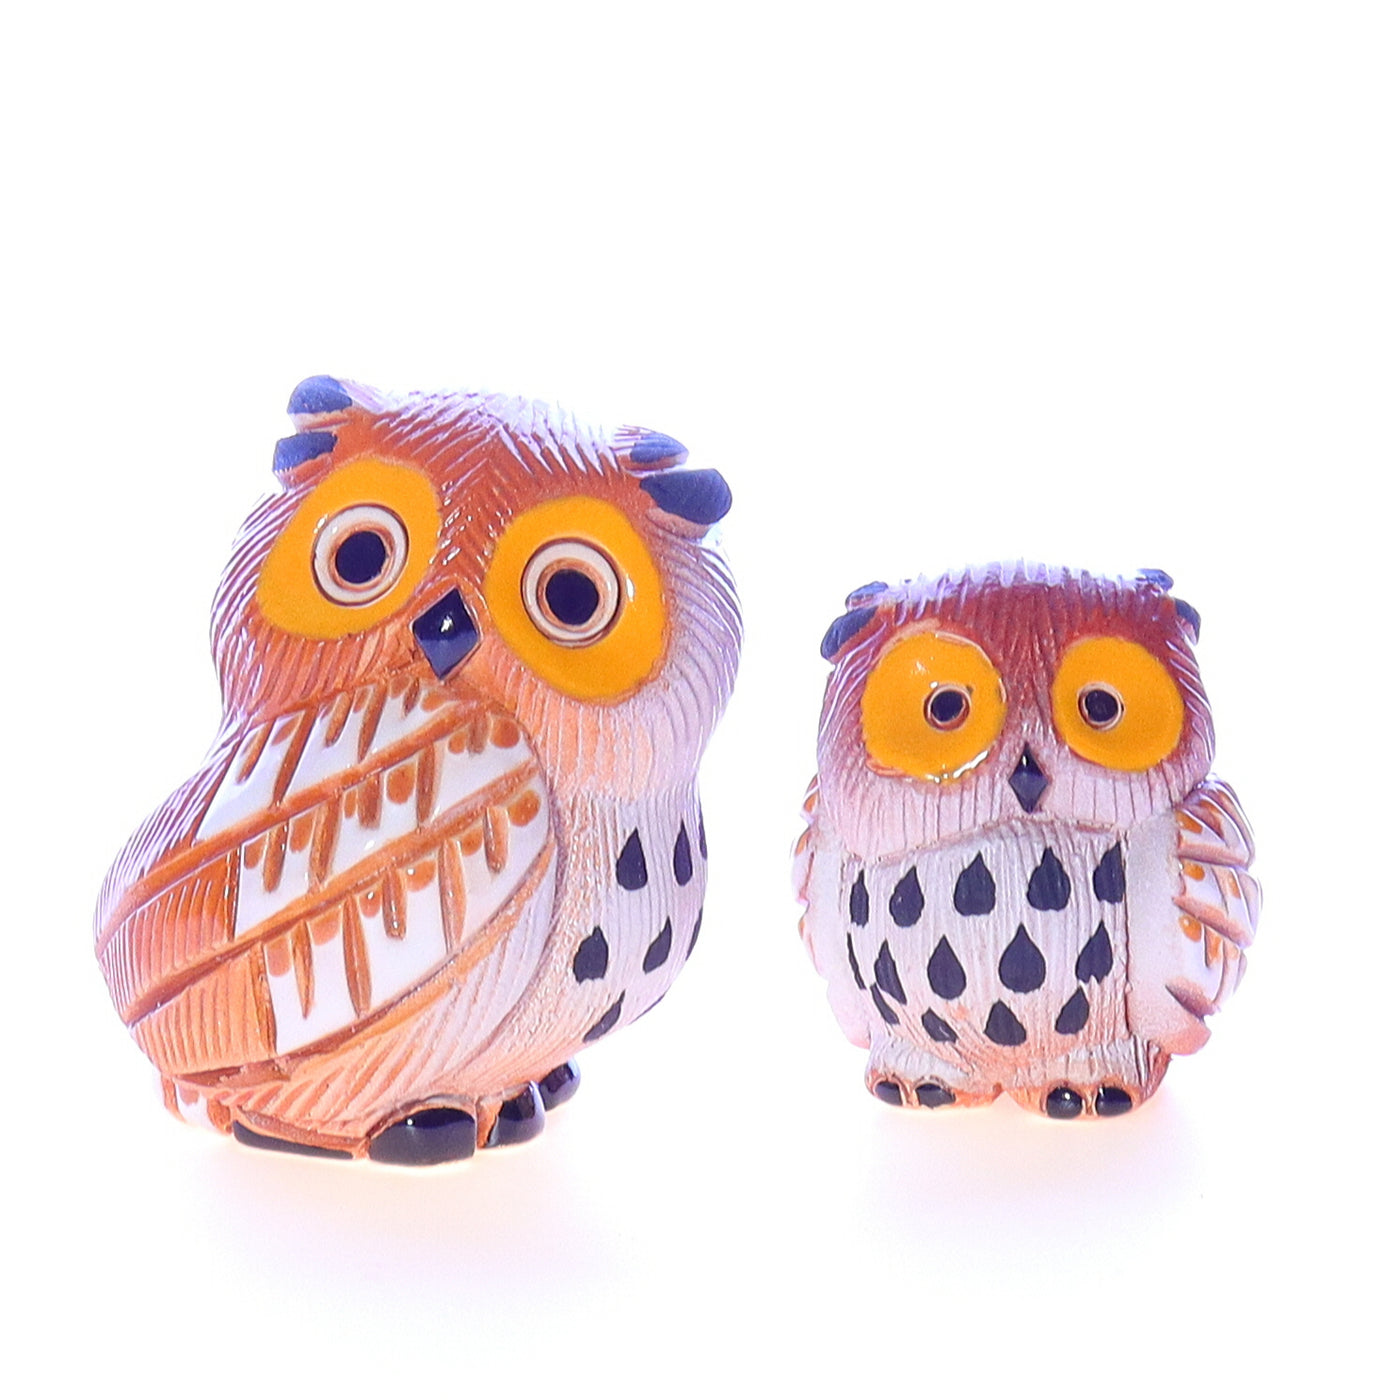 Artesania_Rinconada_Yellow_Eyed_Speckled_Black_Owl_and_Baby_Owl_Figurine Front View